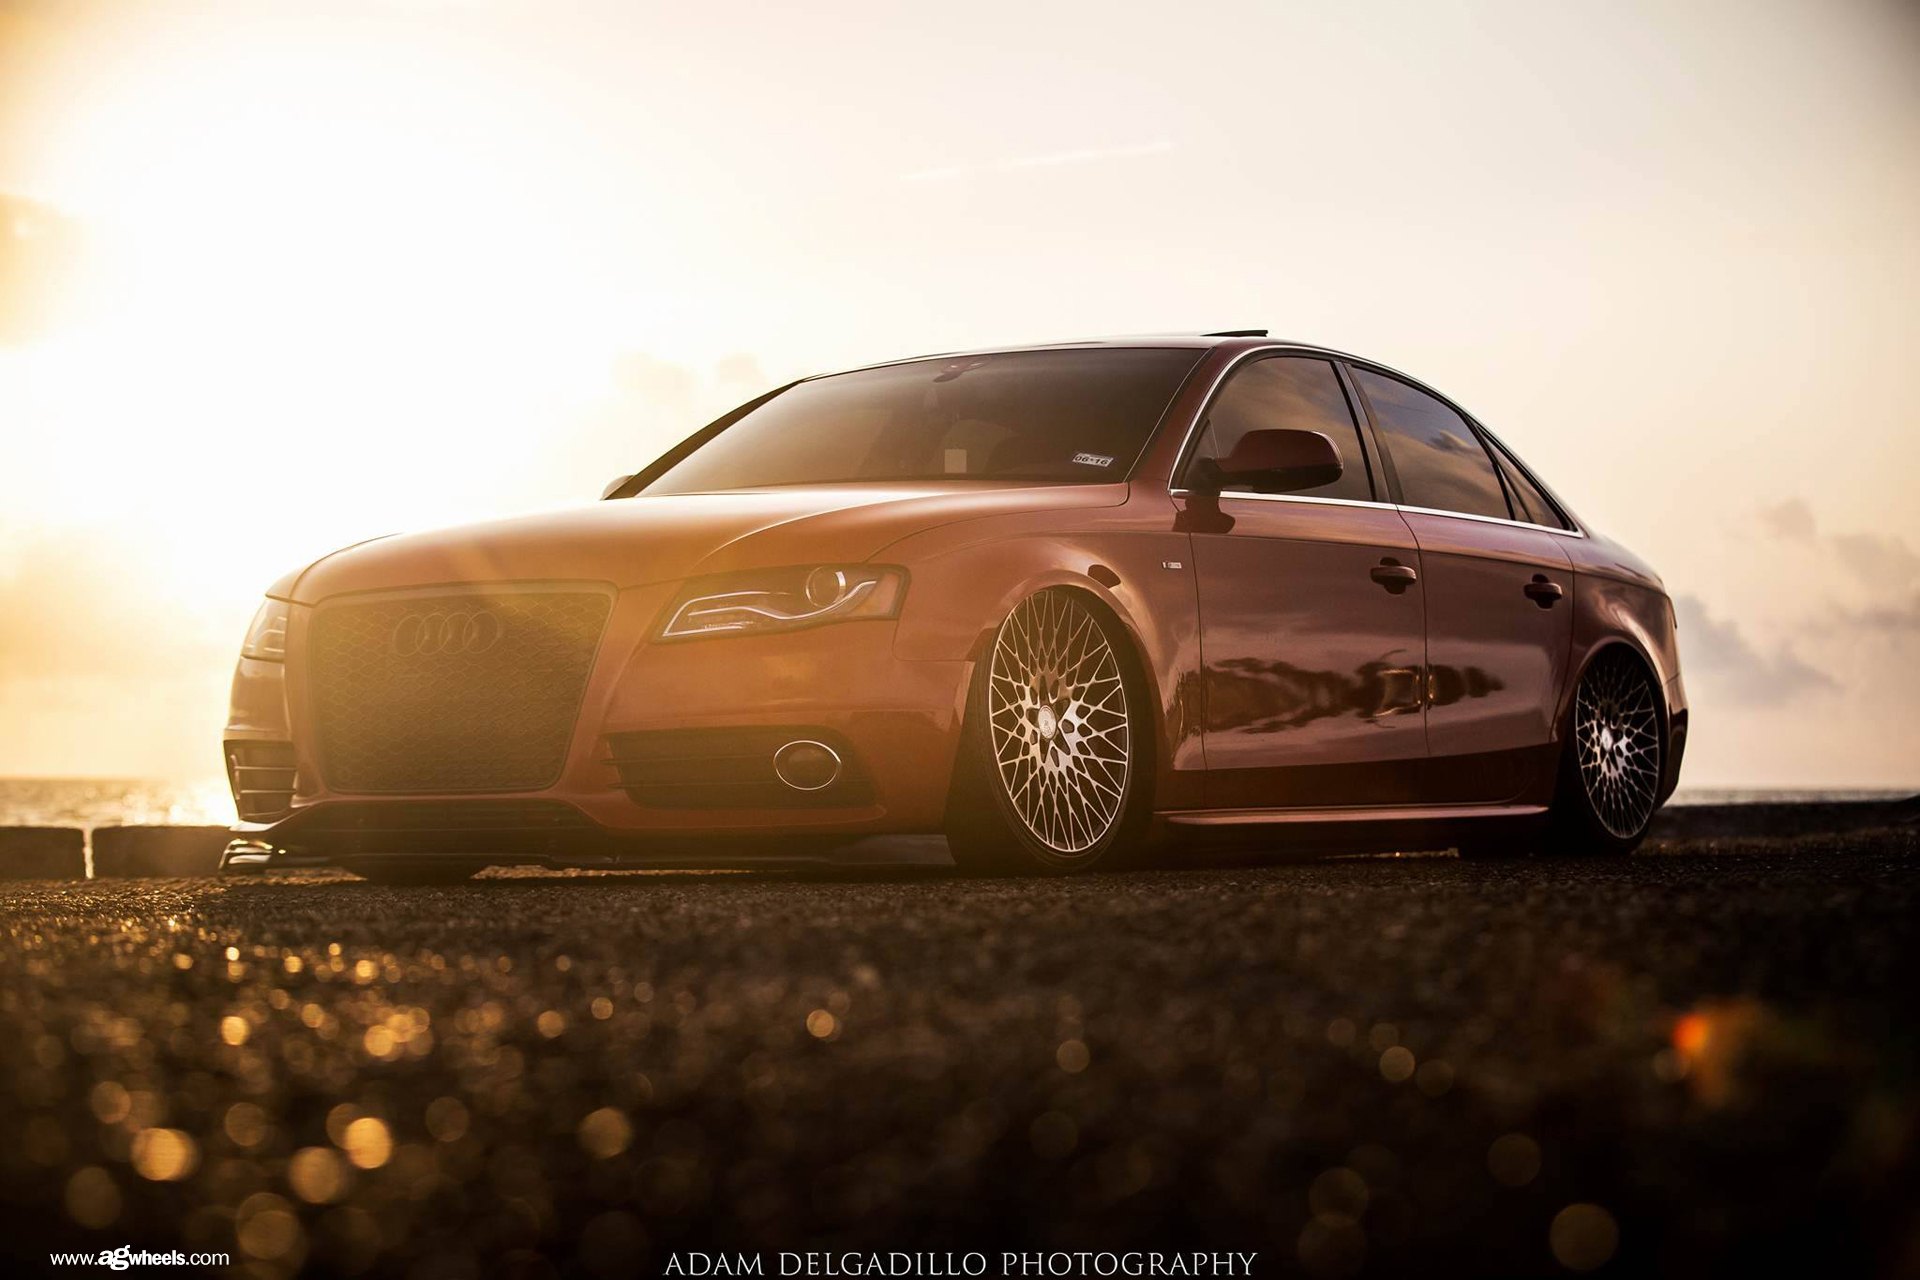 Aftermarket Front Lip on Red Lowered Audi A4 - Photo by Avant Garde Wheels